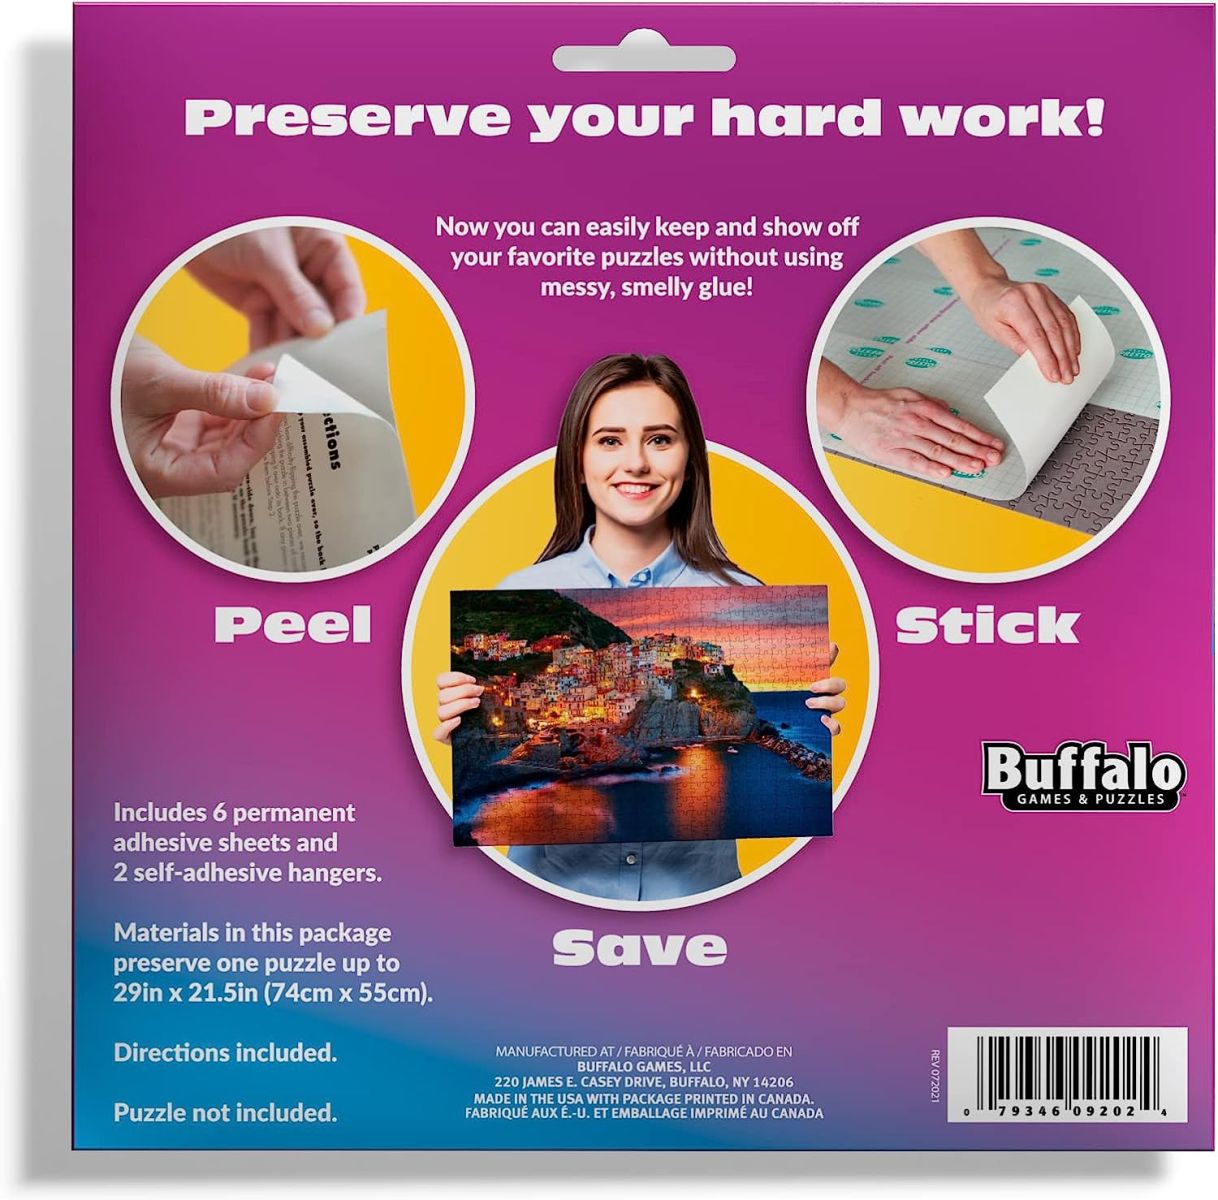 Puzzle Presto! Peel & Stick Puzzle Saver: The Original and Still the Best Way to Preserve Your Finished Puzzle! - 6 Adhesive Sheets and 2 Adhesive Hangers